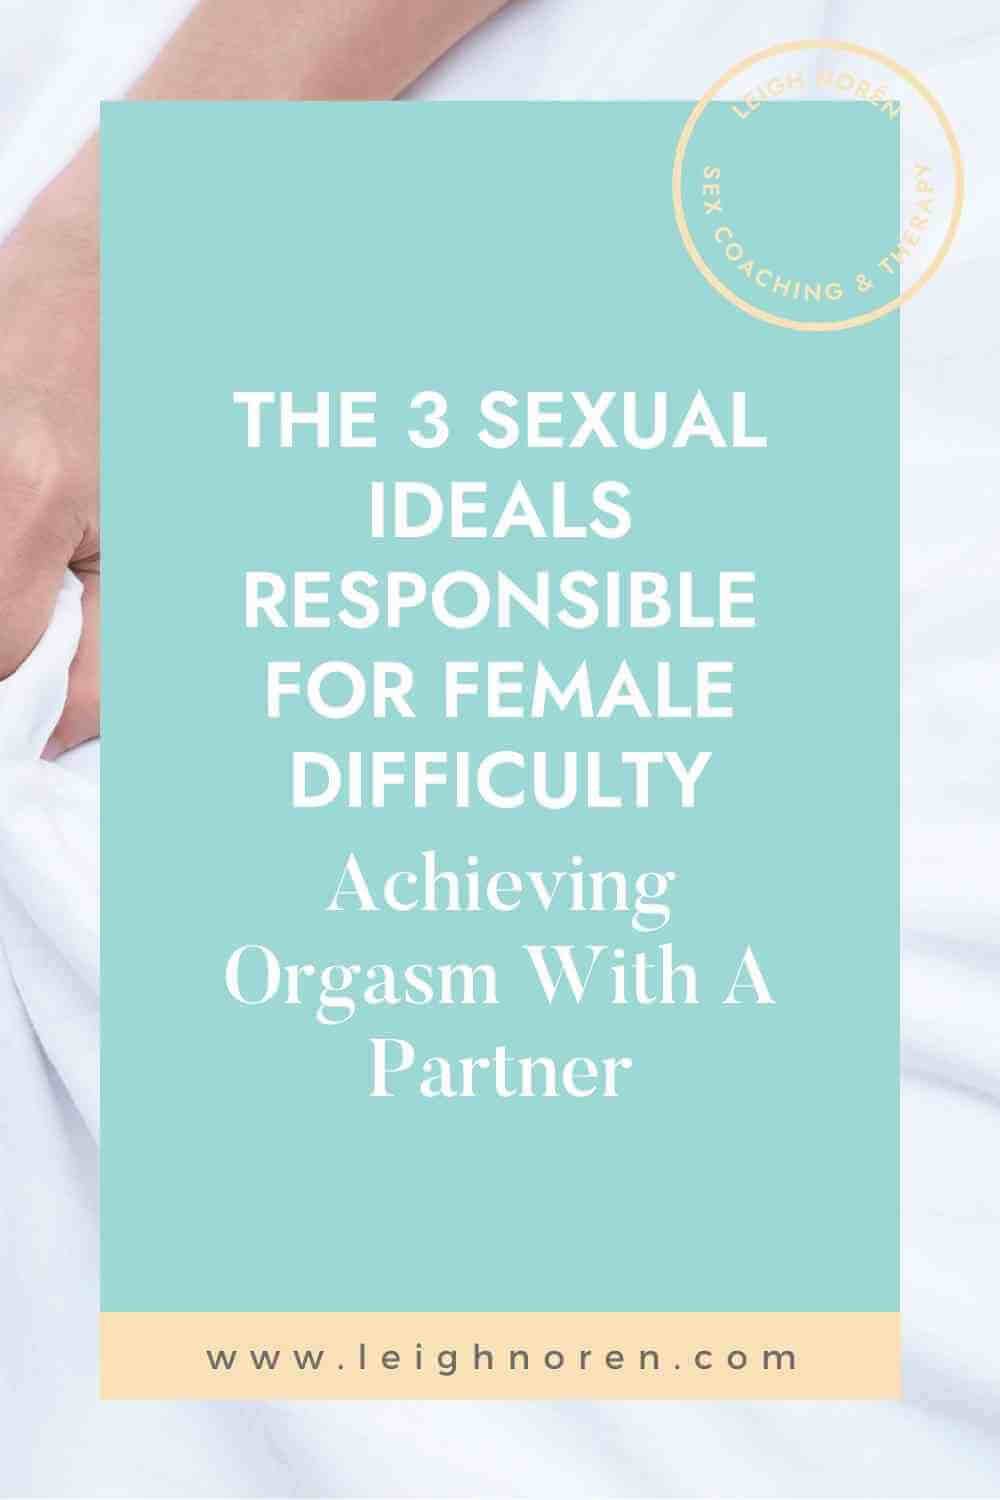 The 3 Sexual Ideals Responsible For Female Difficulty Achieving Orgasm With A Partner